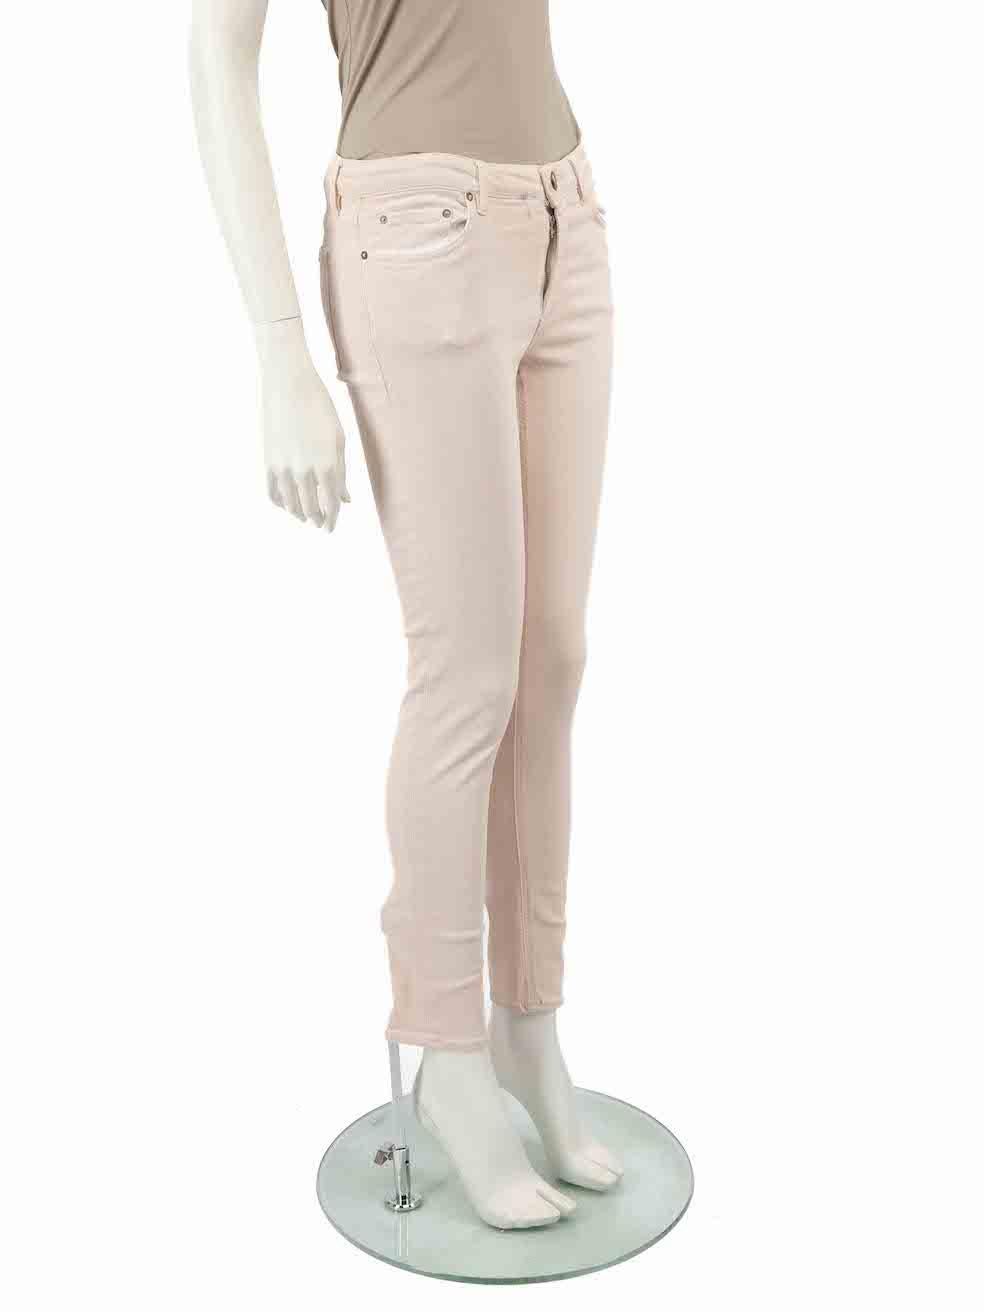 CONDITION is Good. Minor wear to jeans is evident. Light wear to the fabric surface with a small discoloured mark found at the centre front near the fly on this used Acne Studios designer resale item.
 
 
 
 Details
 
 
 Dusty pink
 
 Denim
 
